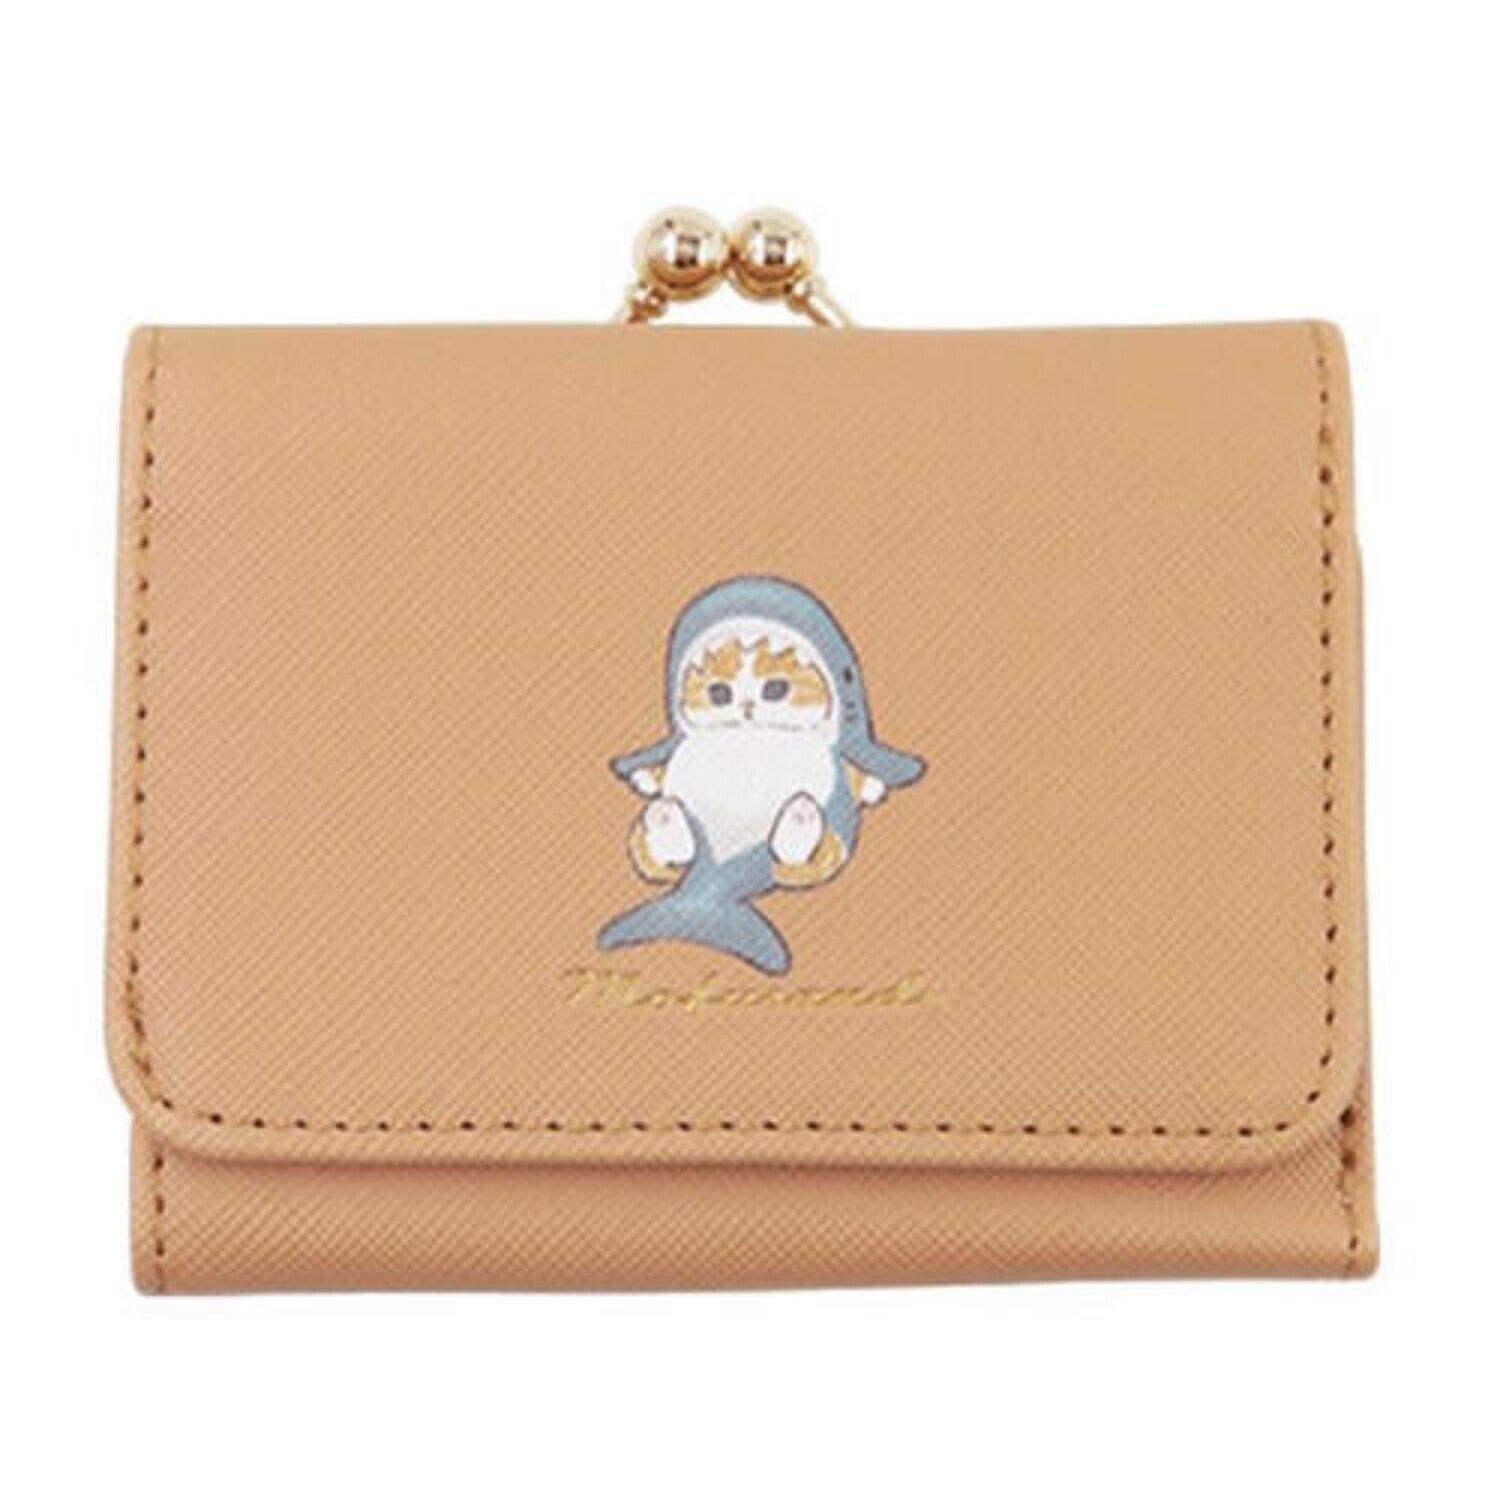 Mofusand Mini Wallet Compact Tri-Fold Clasp Wallet Coin & Card Case (Shark ) New